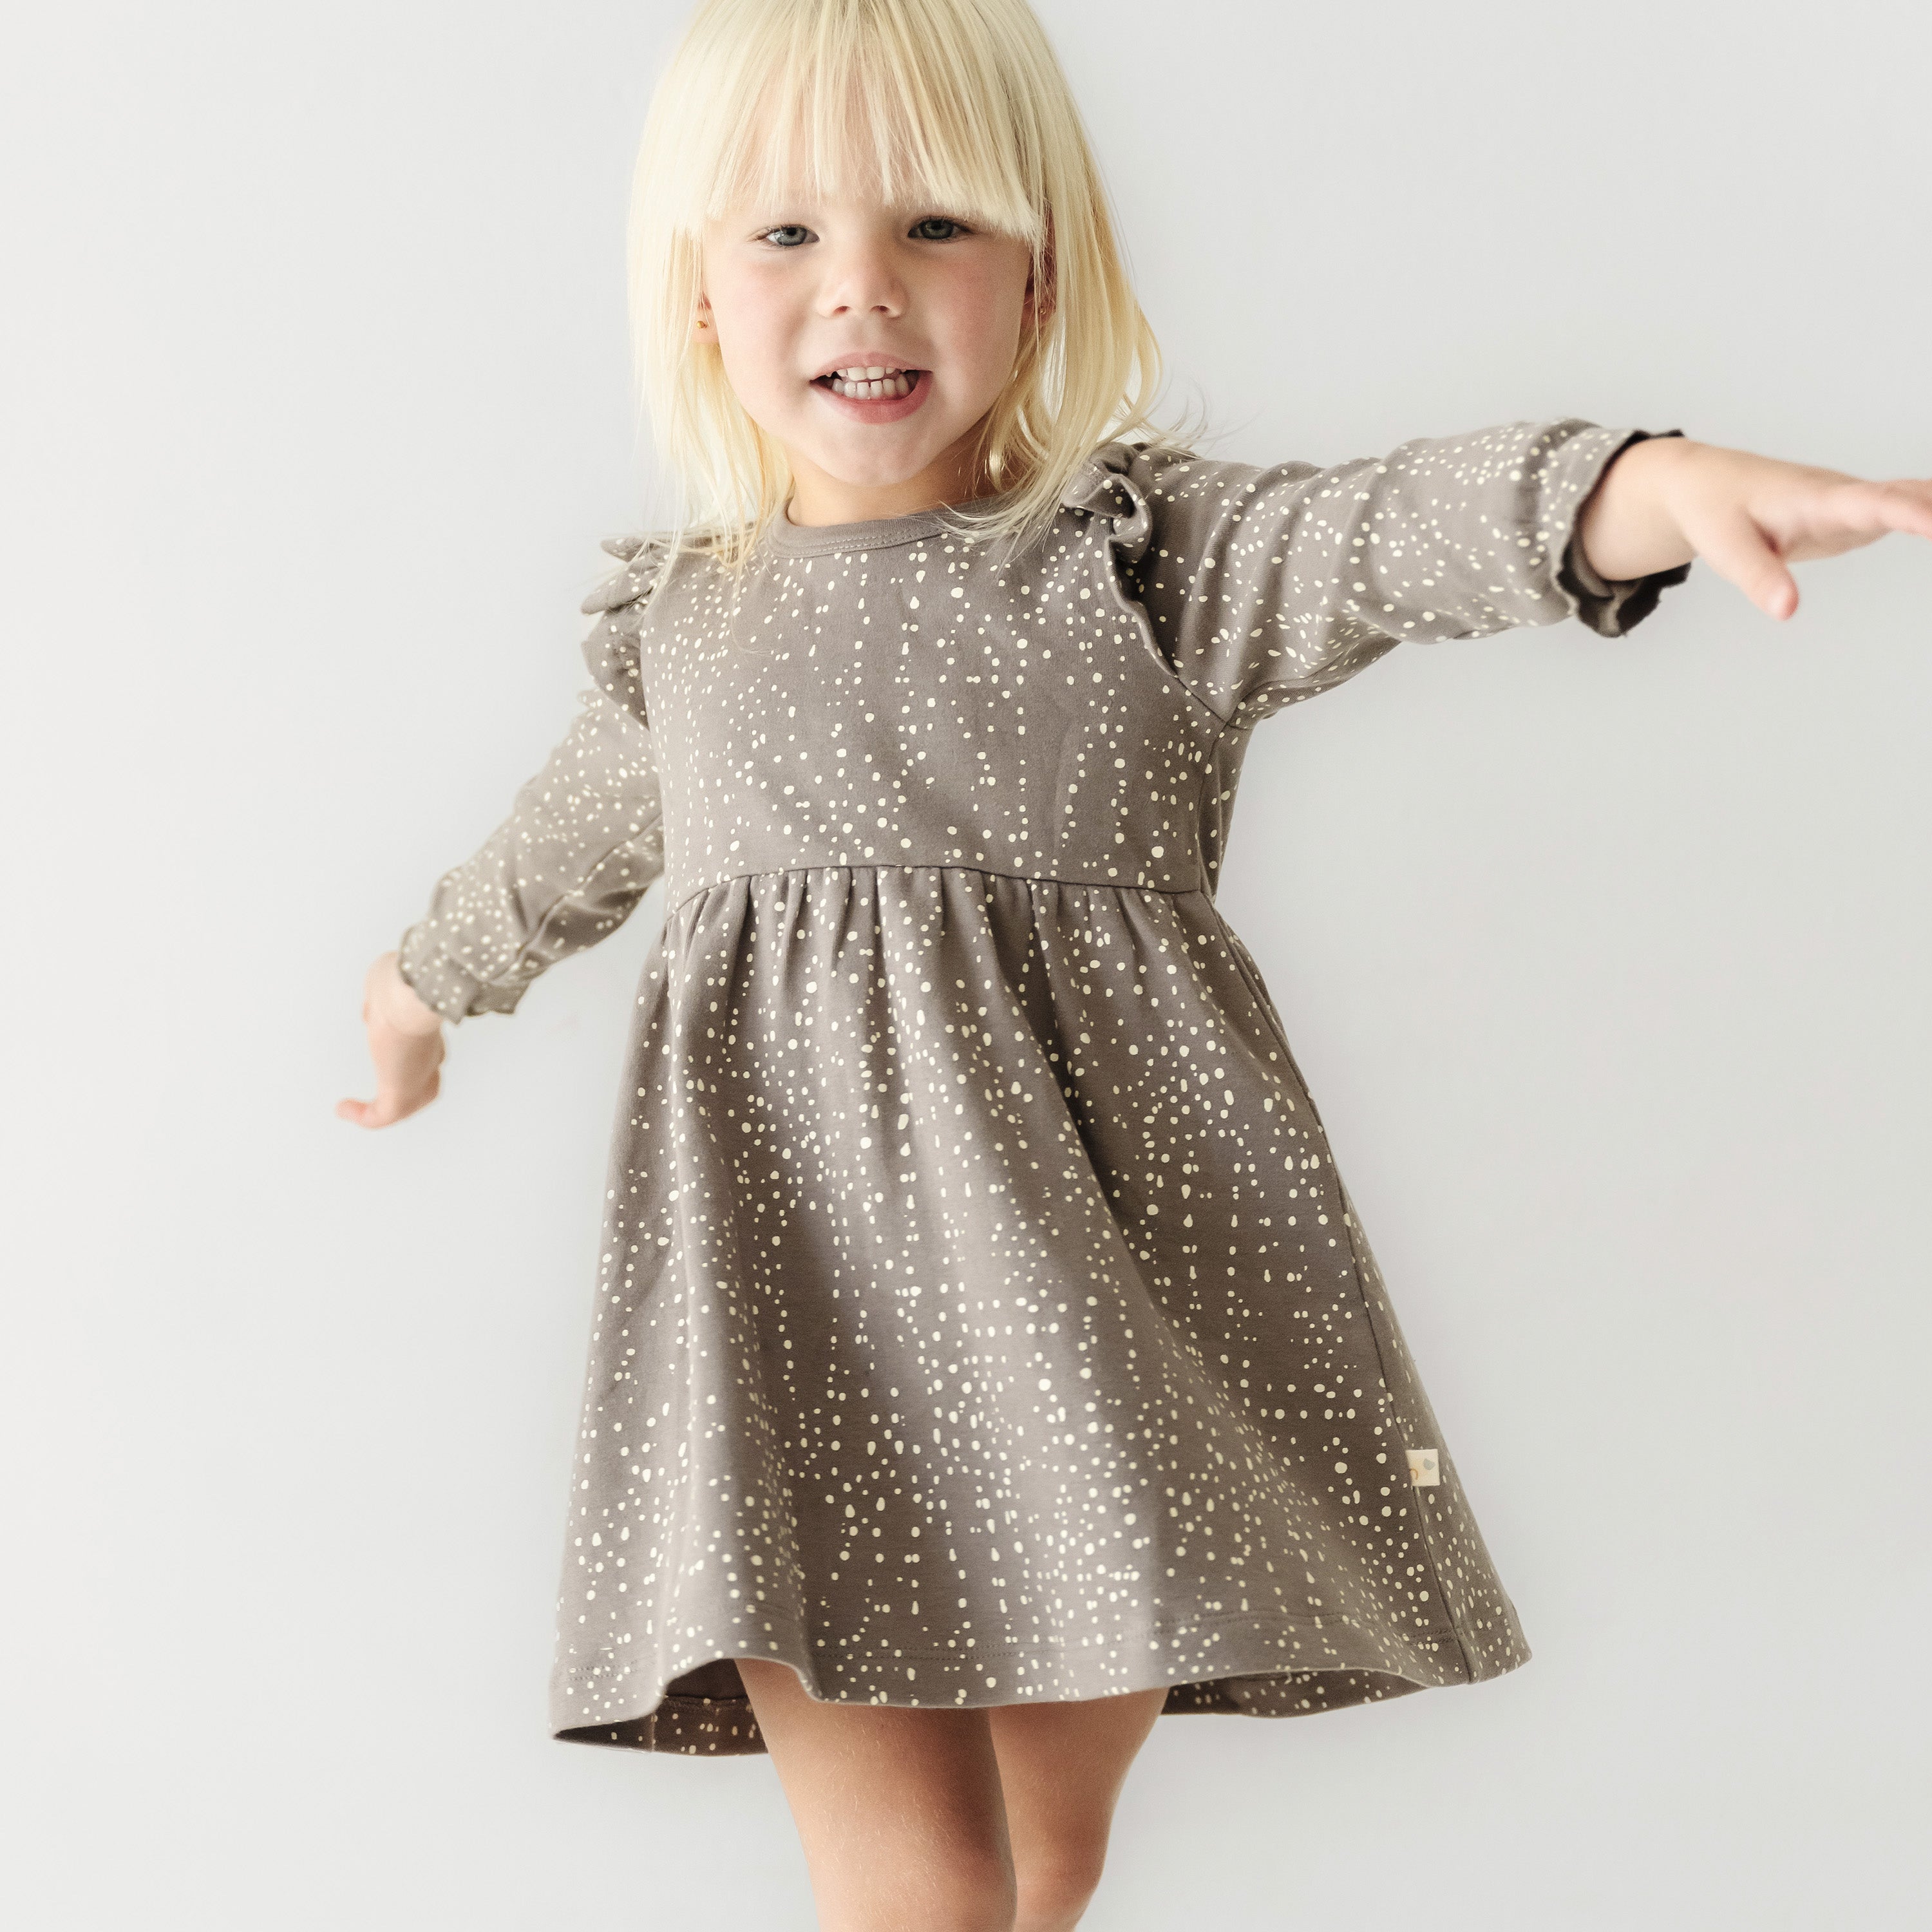 A joyful young girl with blonde hair, wearing an Organic Girls Organic Ruffle Dress - Speckle, playfully reaching out to the side against a light gray background.